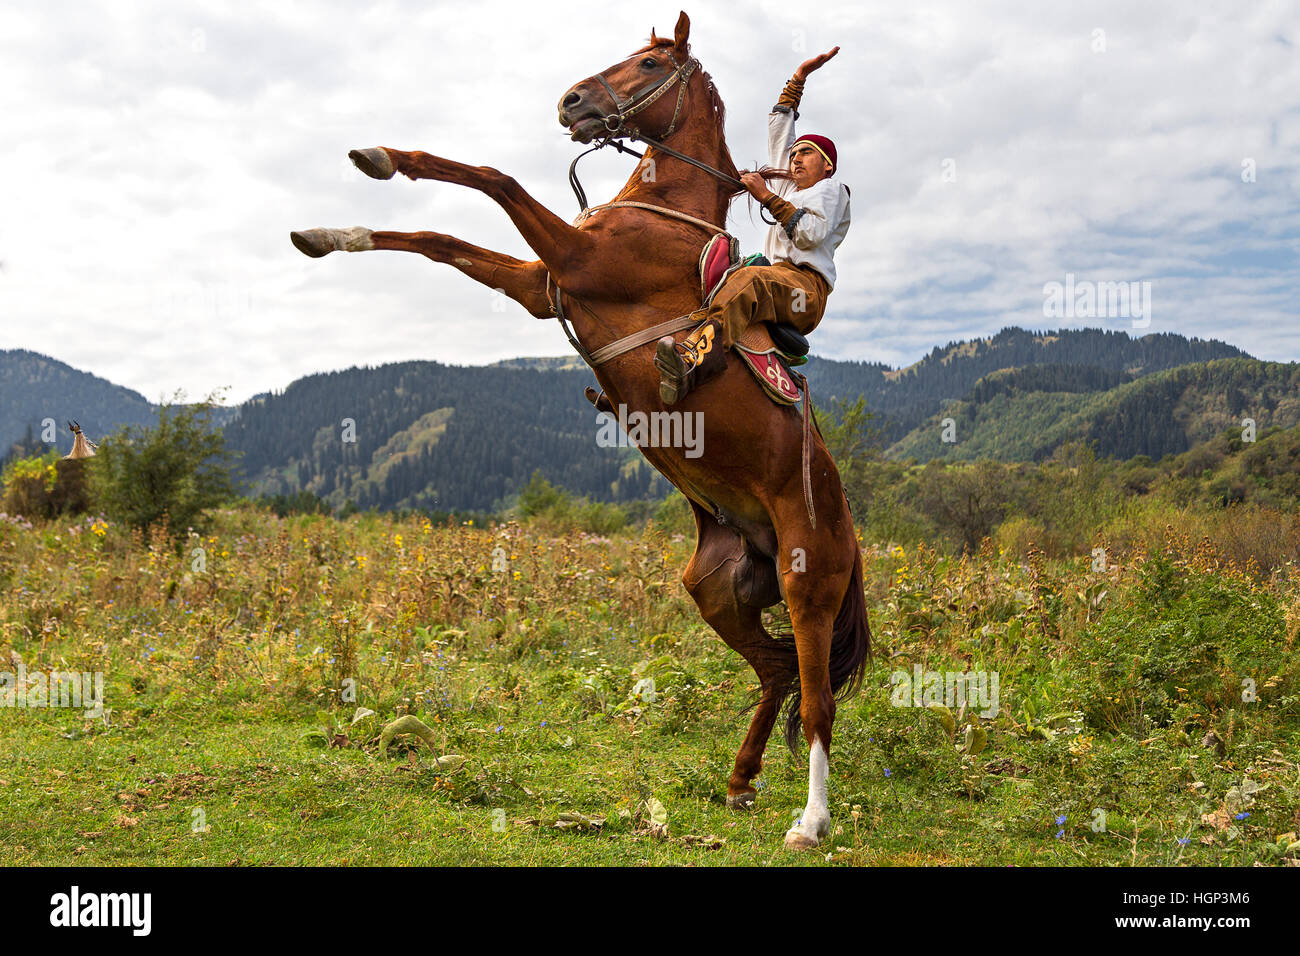 Kazakh horse rider in national costumes gets his horse reared up in Almaty, Kazakhstan. Stock Photo